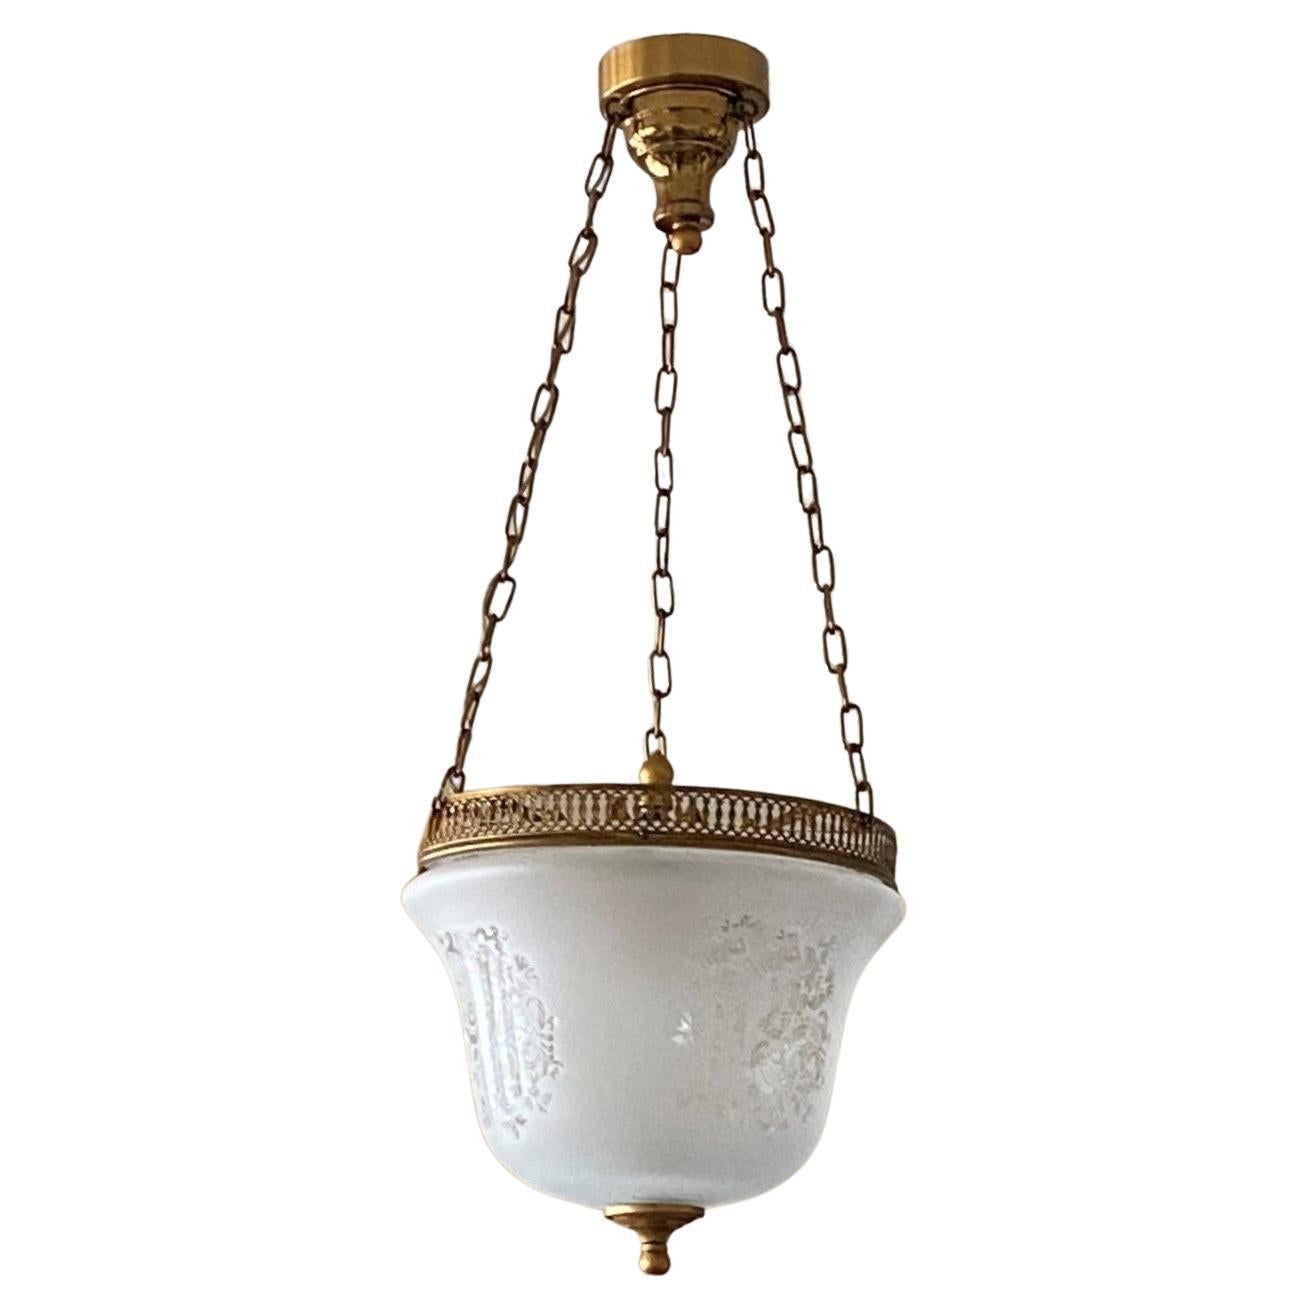 French Art Deco Etched Glass Brass Bell Lantern Cloche Pendant, 1930s For Sale